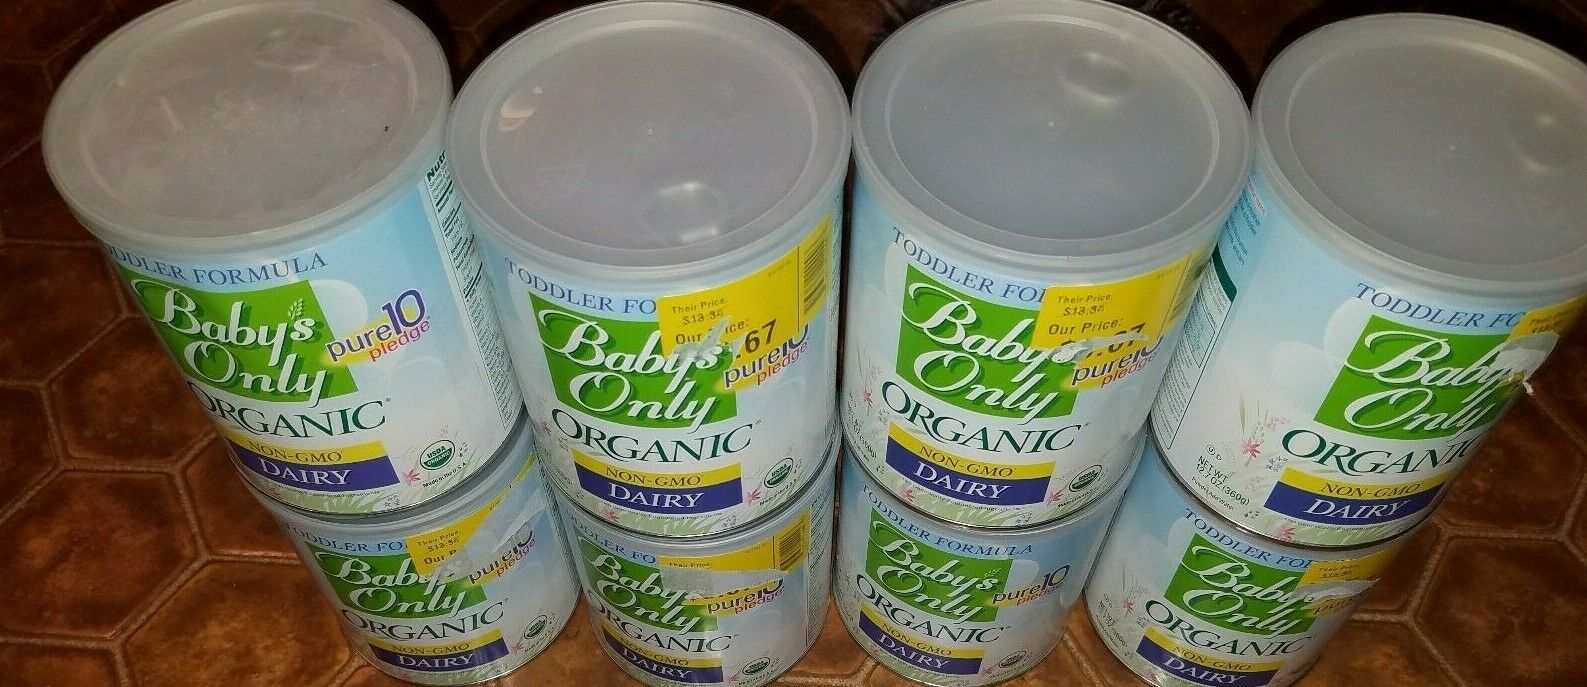 Lot Of 8 Baby’s Only Organic Dairy Formula Toddler - 12.7 oz - Powder- NEW!